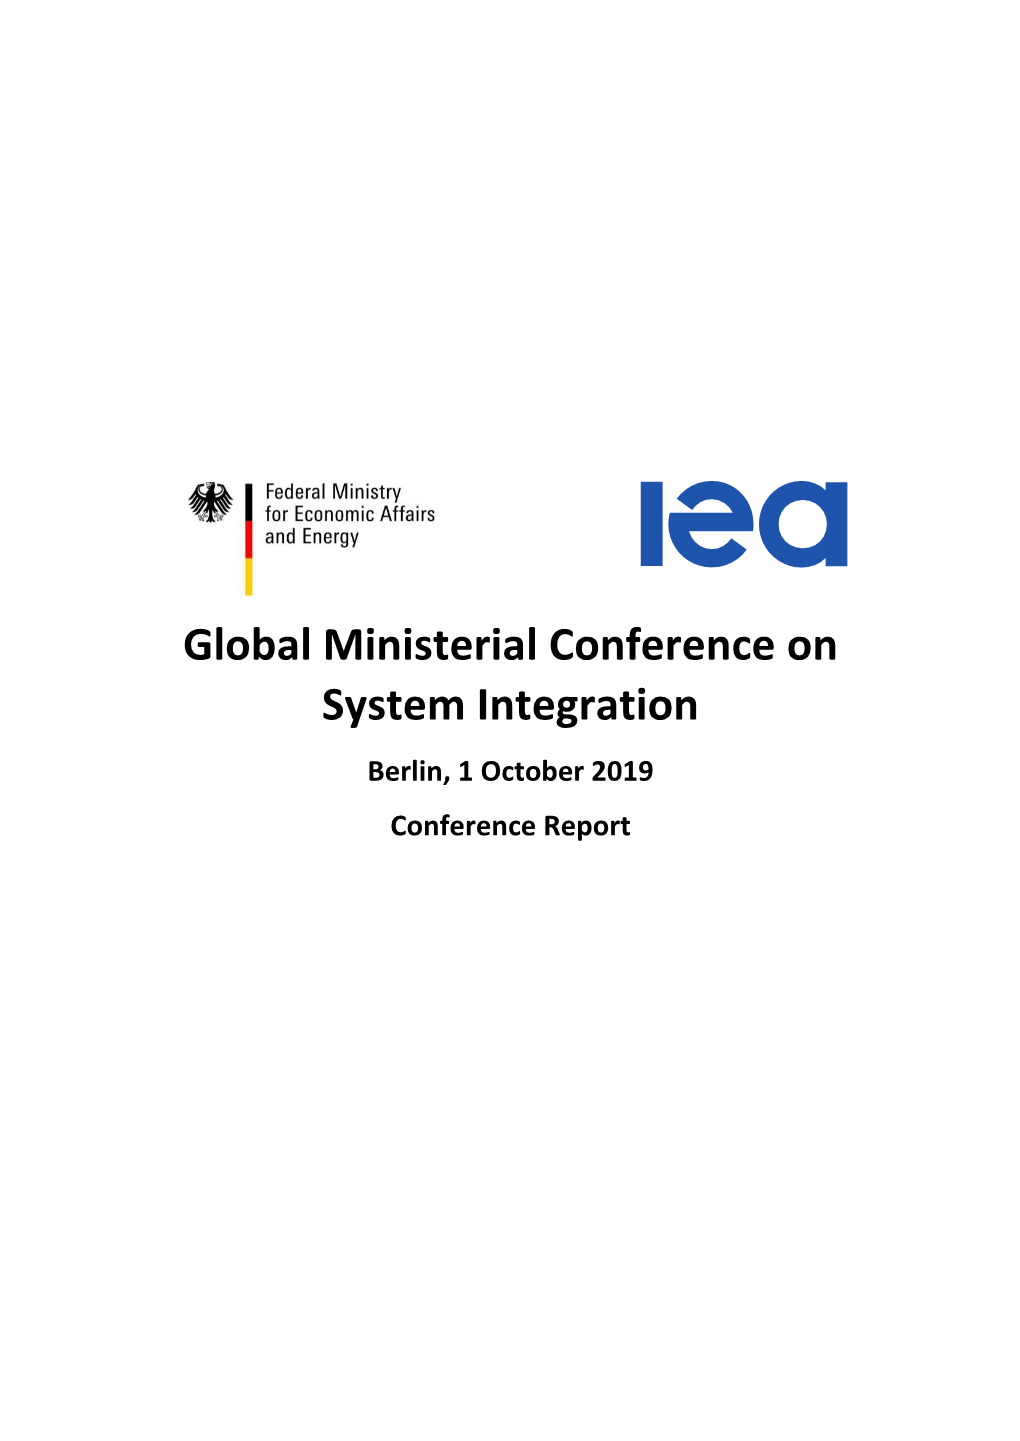 Global Ministerial Conference on System Integration Berlin, 1 October 2019 Conference Report Introduction